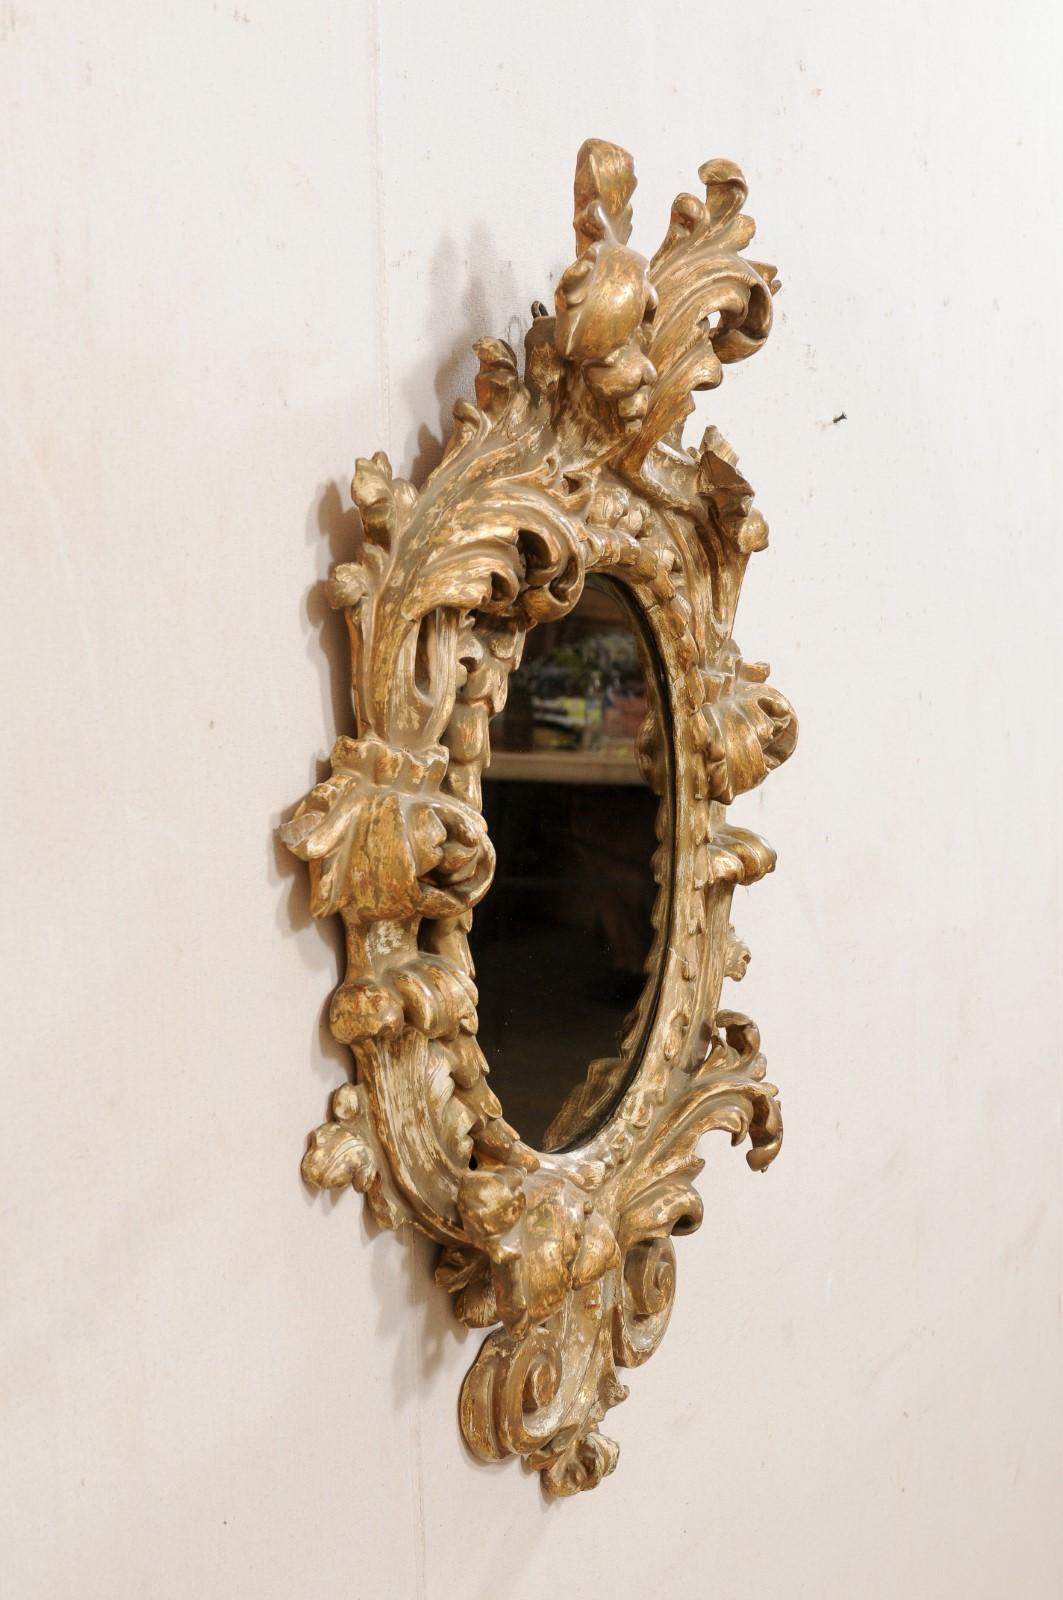 Italian Ornate Acanthus-Carved Mirror w/Oblong, Oval-Shaped Glass, 18th/19th C. For Sale 2